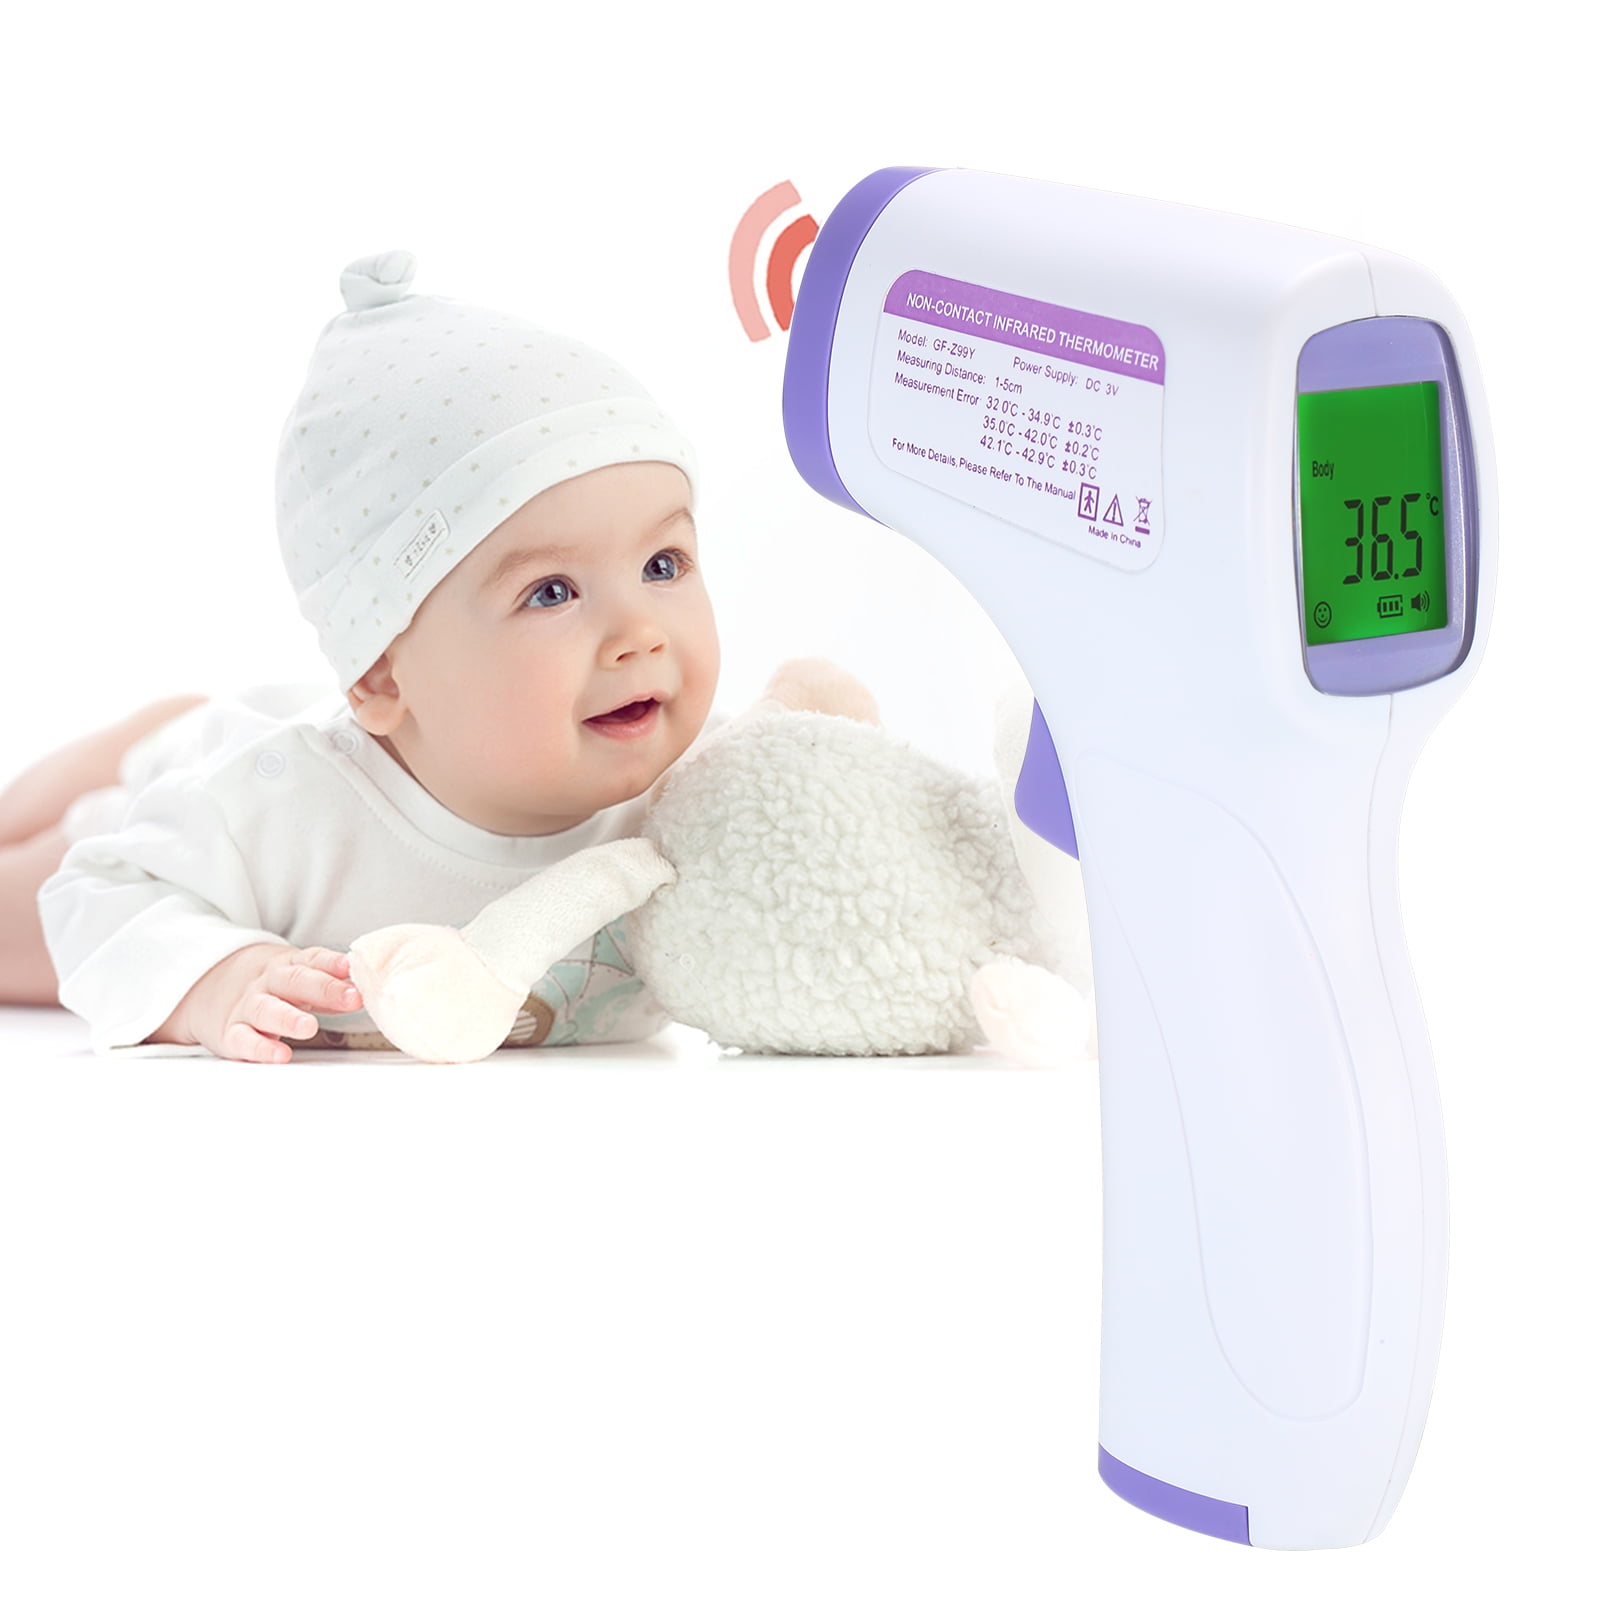 Digital Forehead Thermometer Baby Adult Body Non-Contact IR Infrared Thermometer